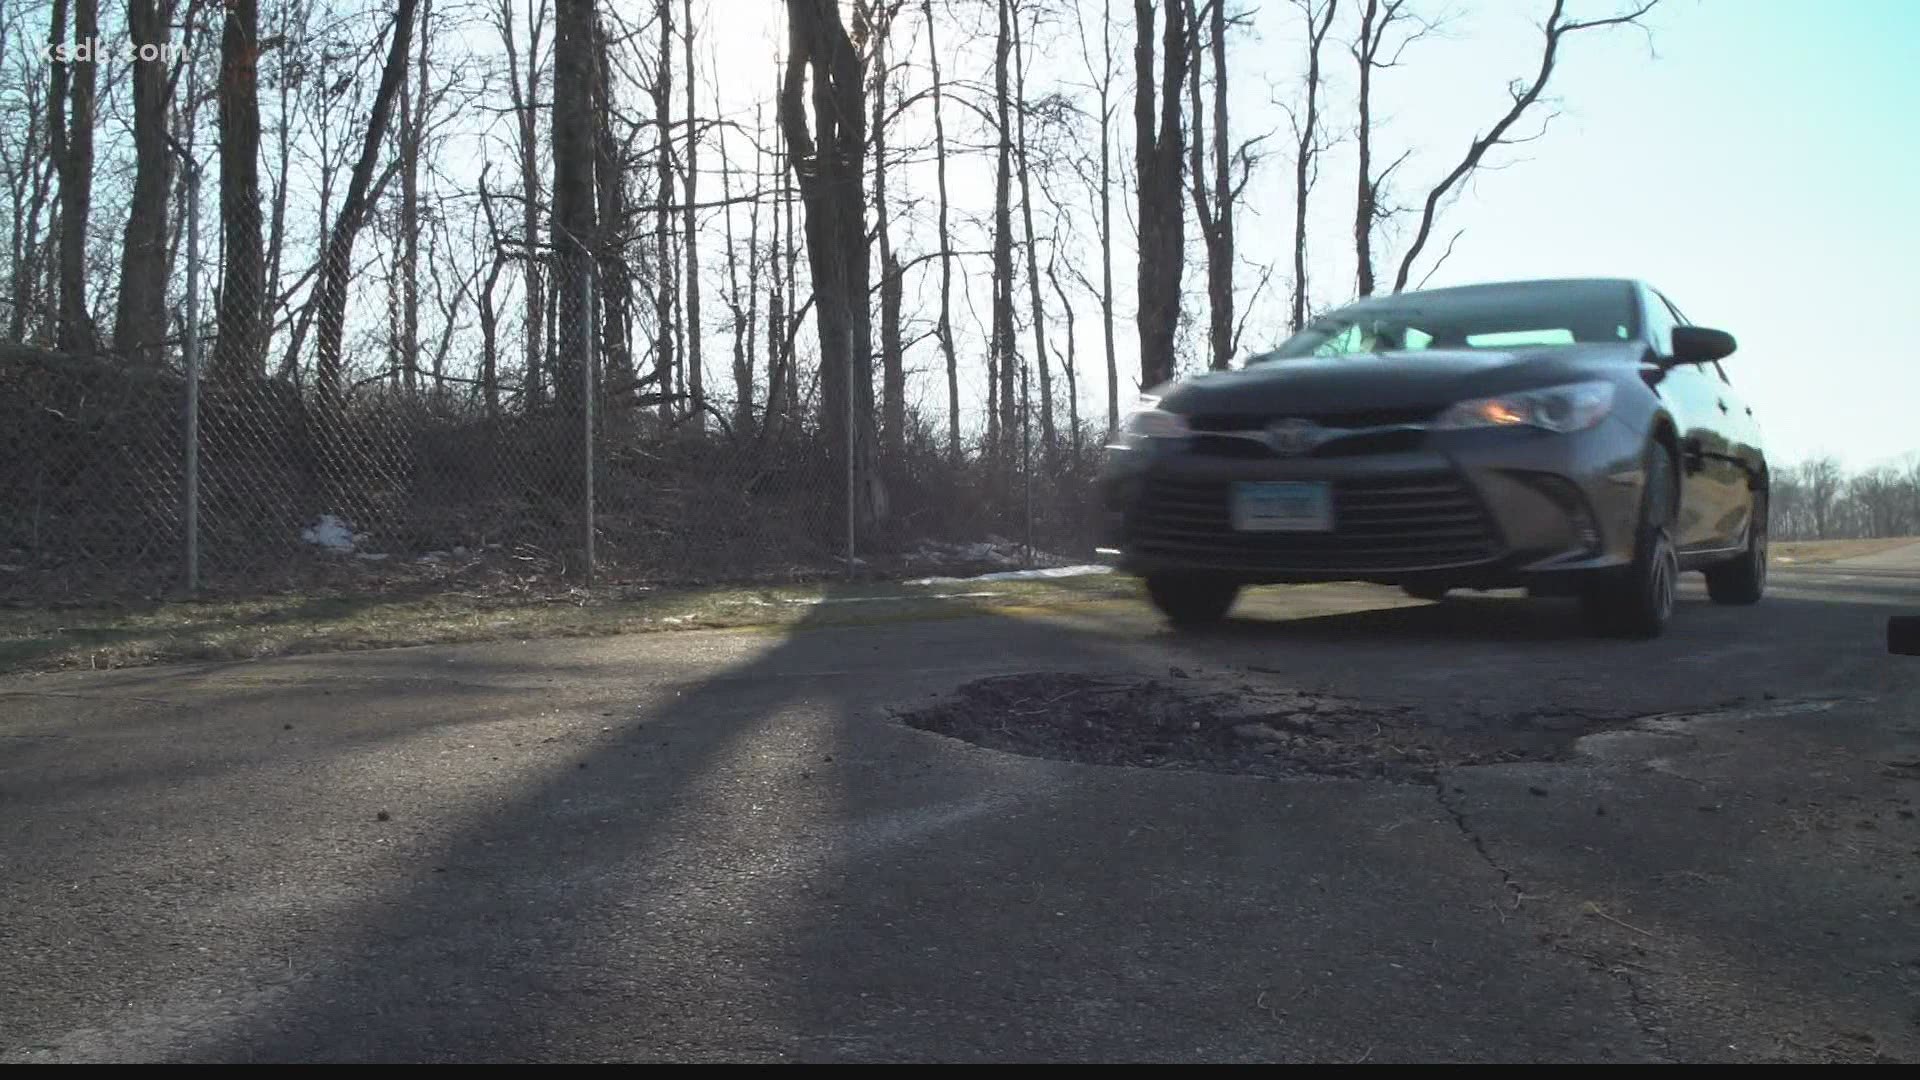 Consumer Reports says that keeping your tires properly inflated and having adequate tread depth is key to preventing pothole damage